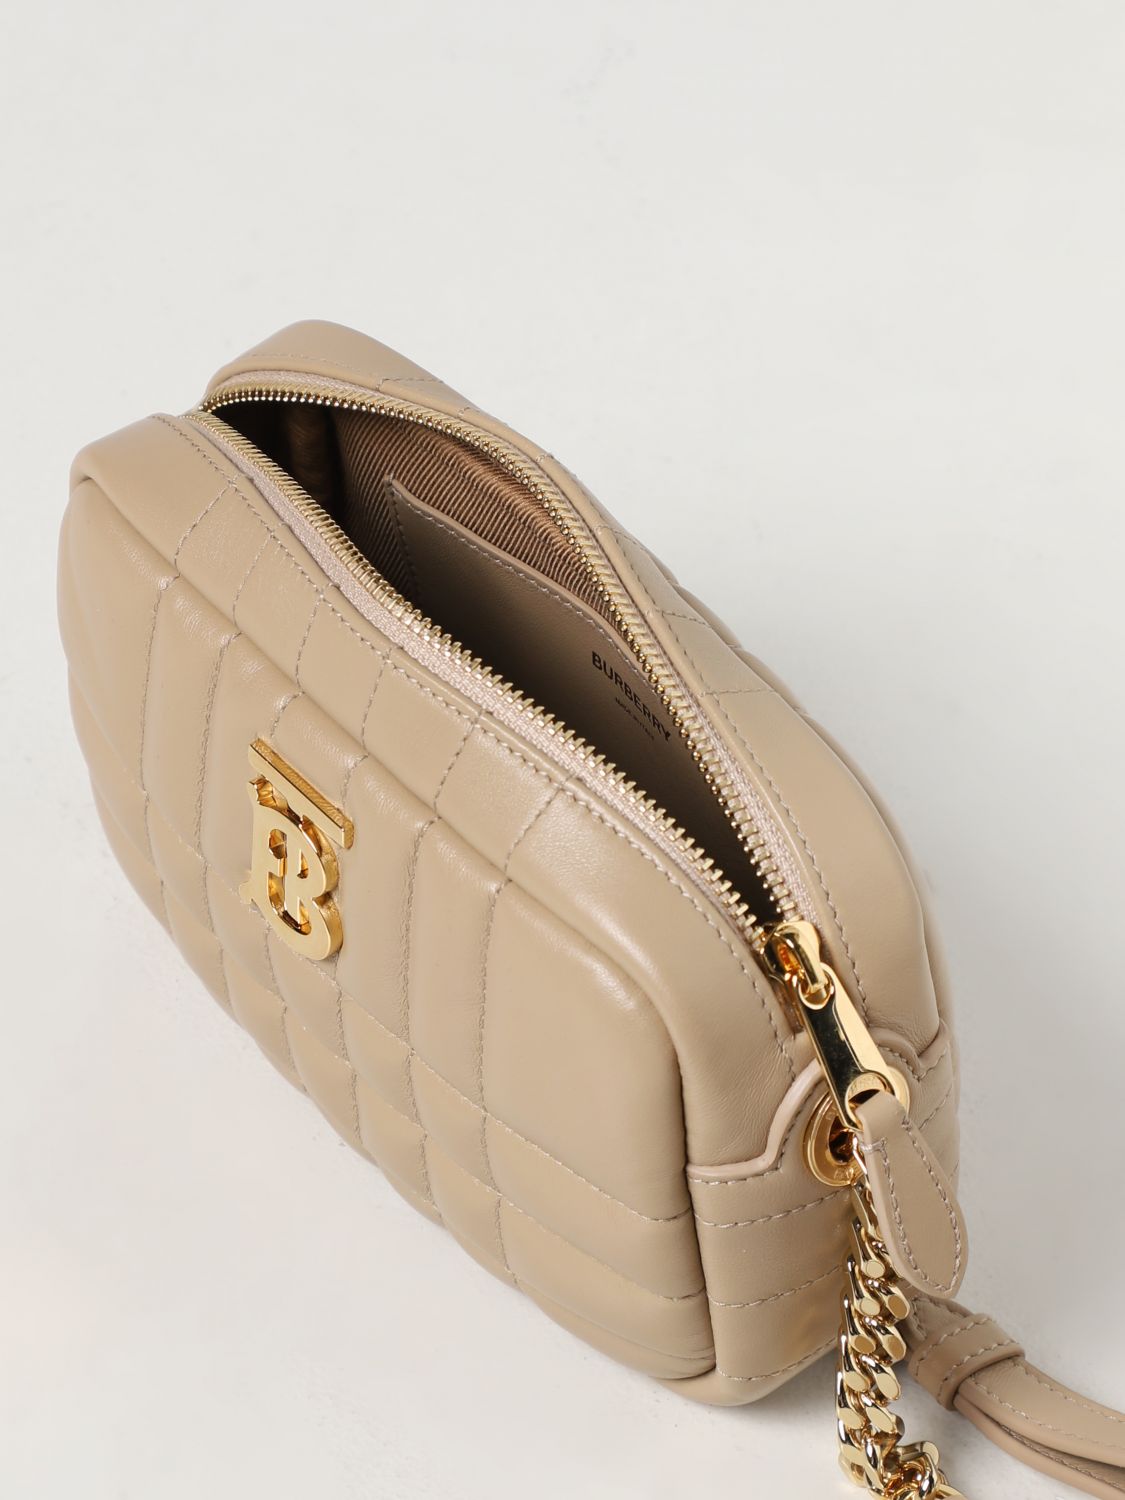 BURBERRY: Lola bag in quilted leather - Beige  Burberry mini bag 8063015  online at